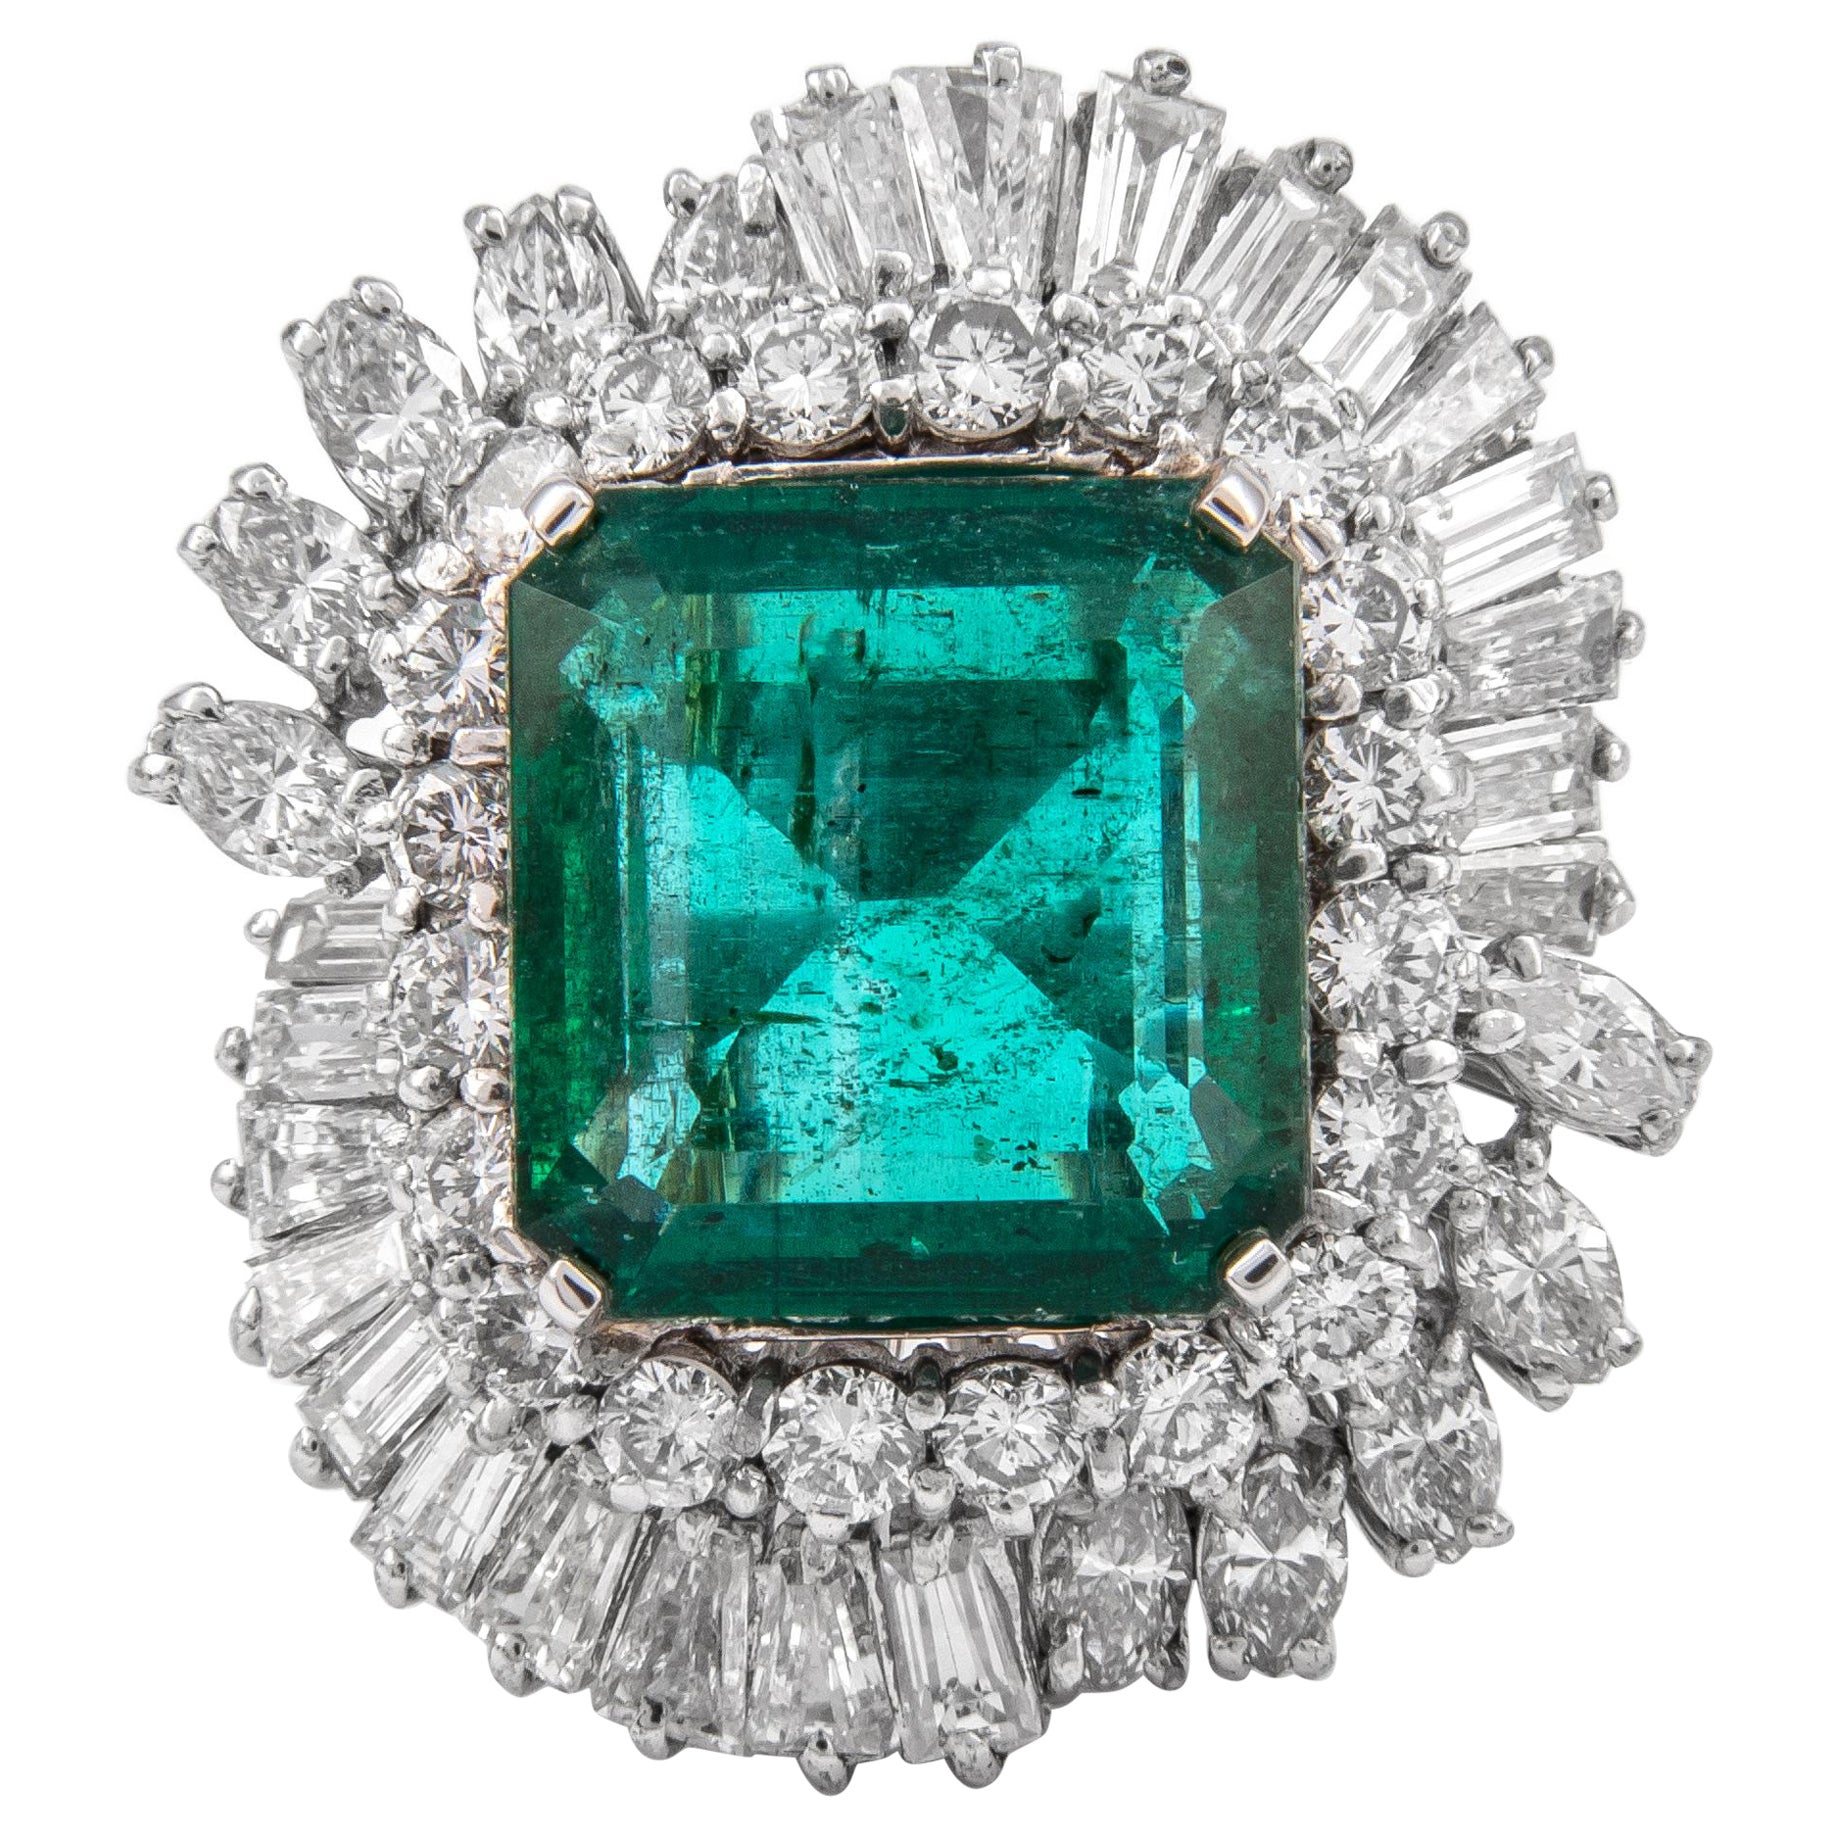 Vintage GIA 13.07ct Emerald Minor with 8.90ct Diamonds Ring 18k White Gold